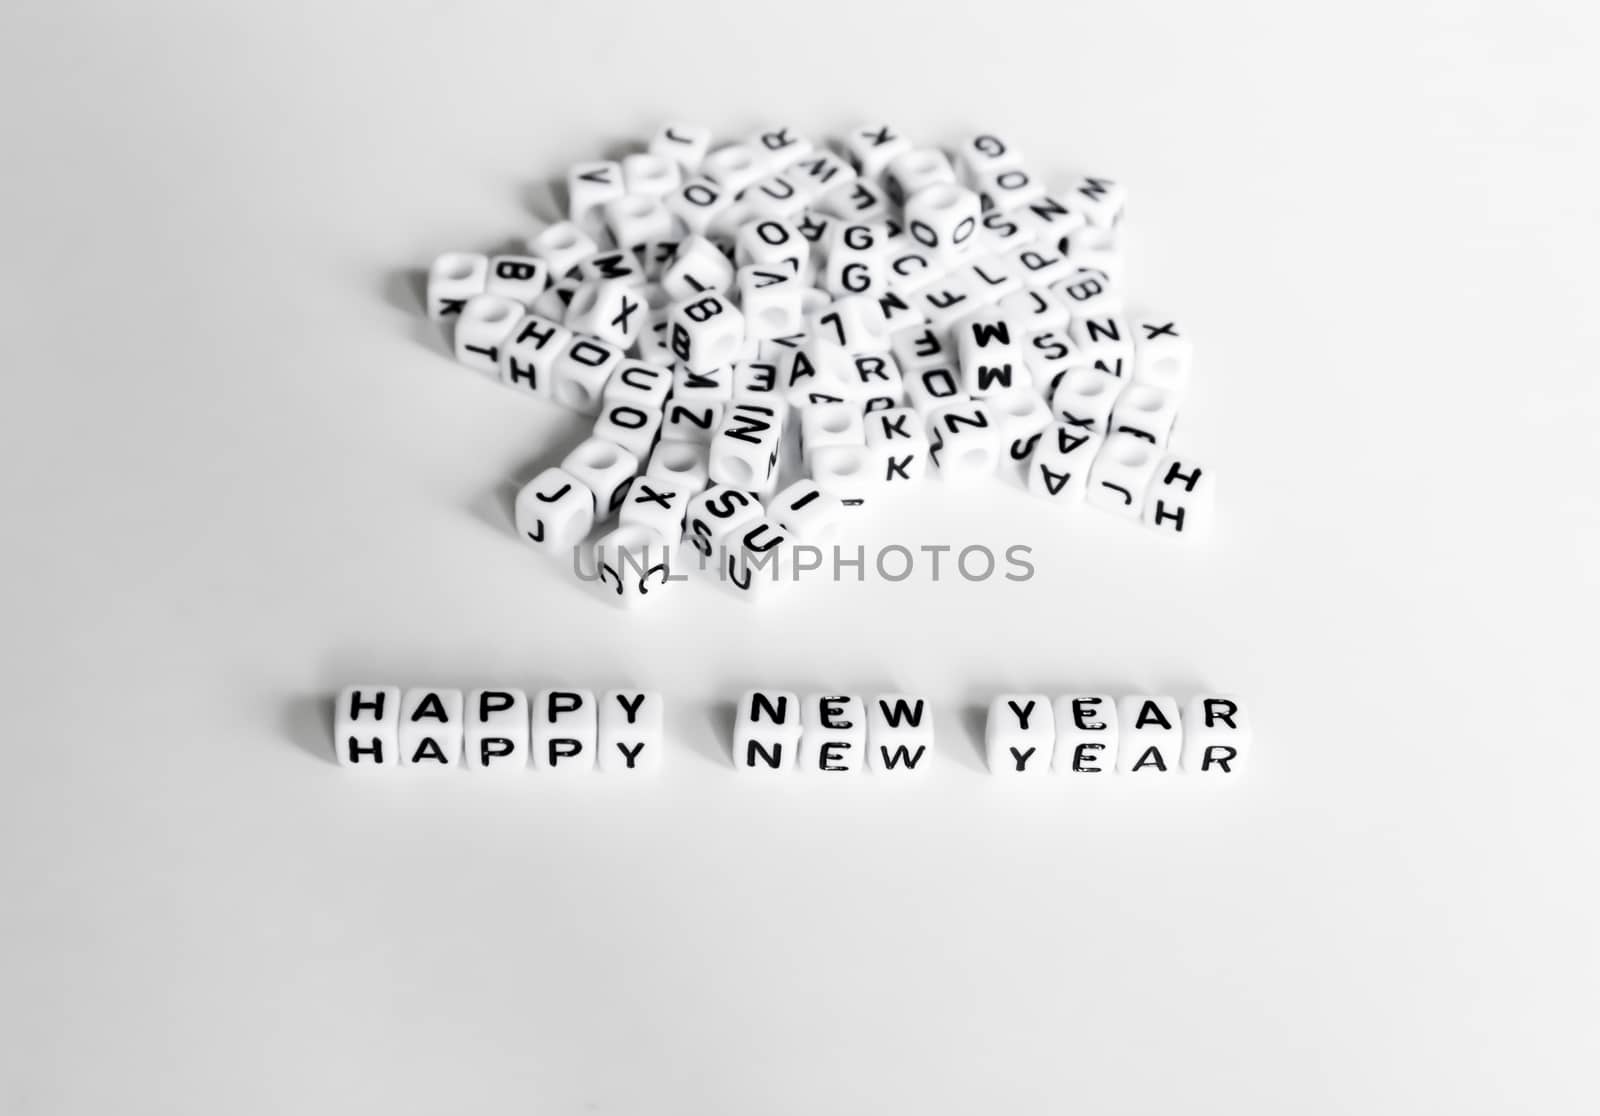 Happy New Year design element for calendar, greeting cards, sales stickers by Tetyana